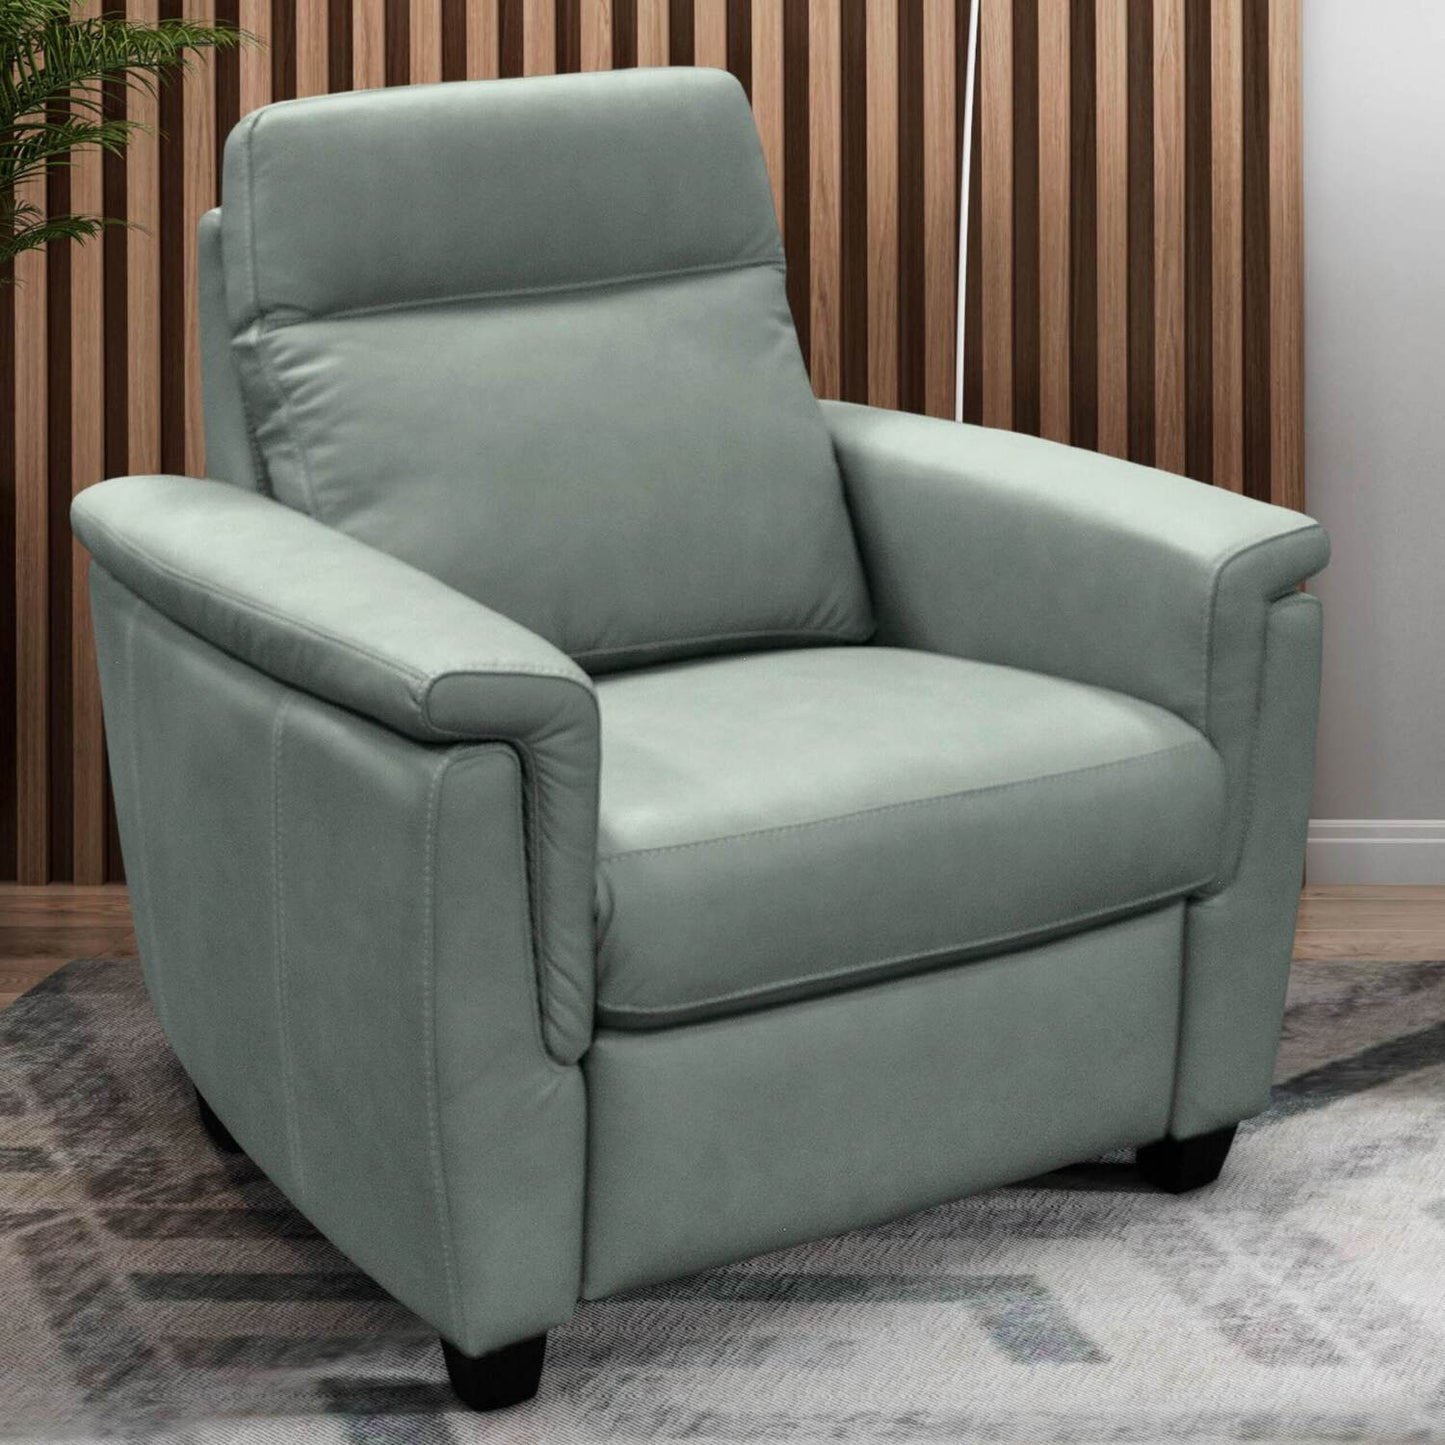 Power Solutions - 509-bc Recliner